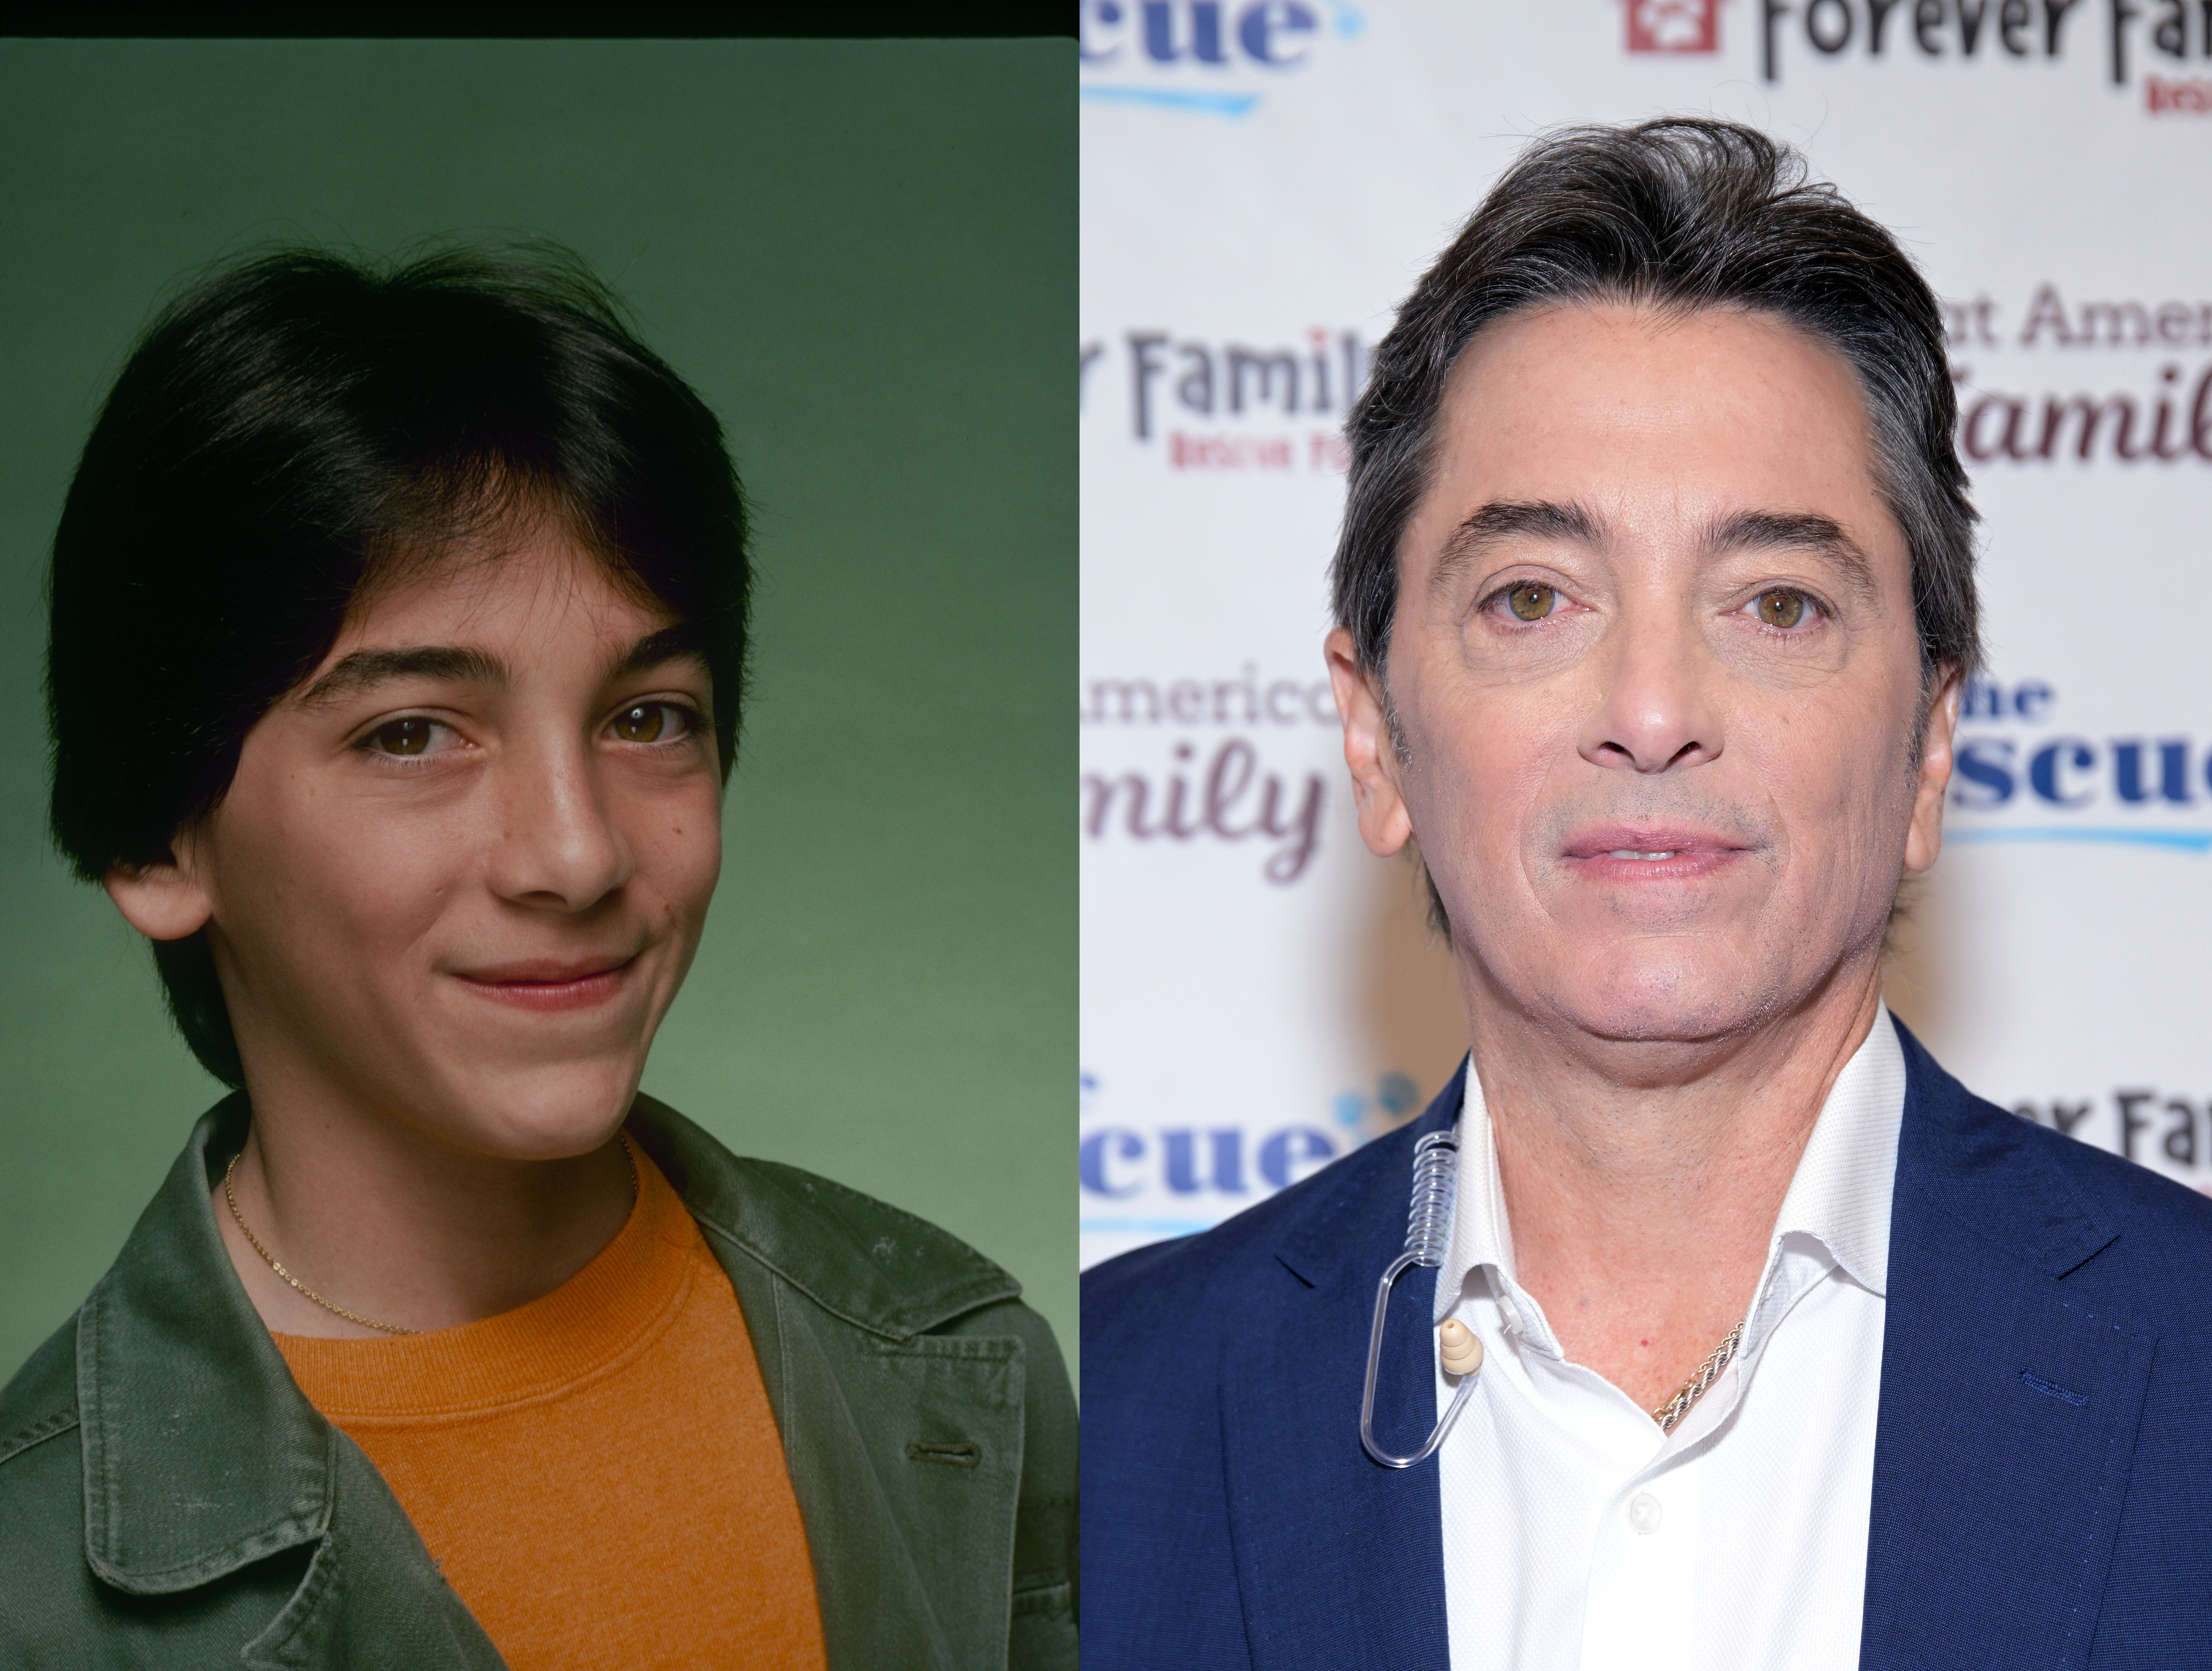 Scott Baio pictured as Chachi Arcola in "Happy Days." | Actor Scott Baio attends the animal rescue telethon "To The Rescue Pup-A-Thon" presented by Great American Family at Vista Studios on February 12, 2023 in Los Angeles, California. | Source: Getty Images